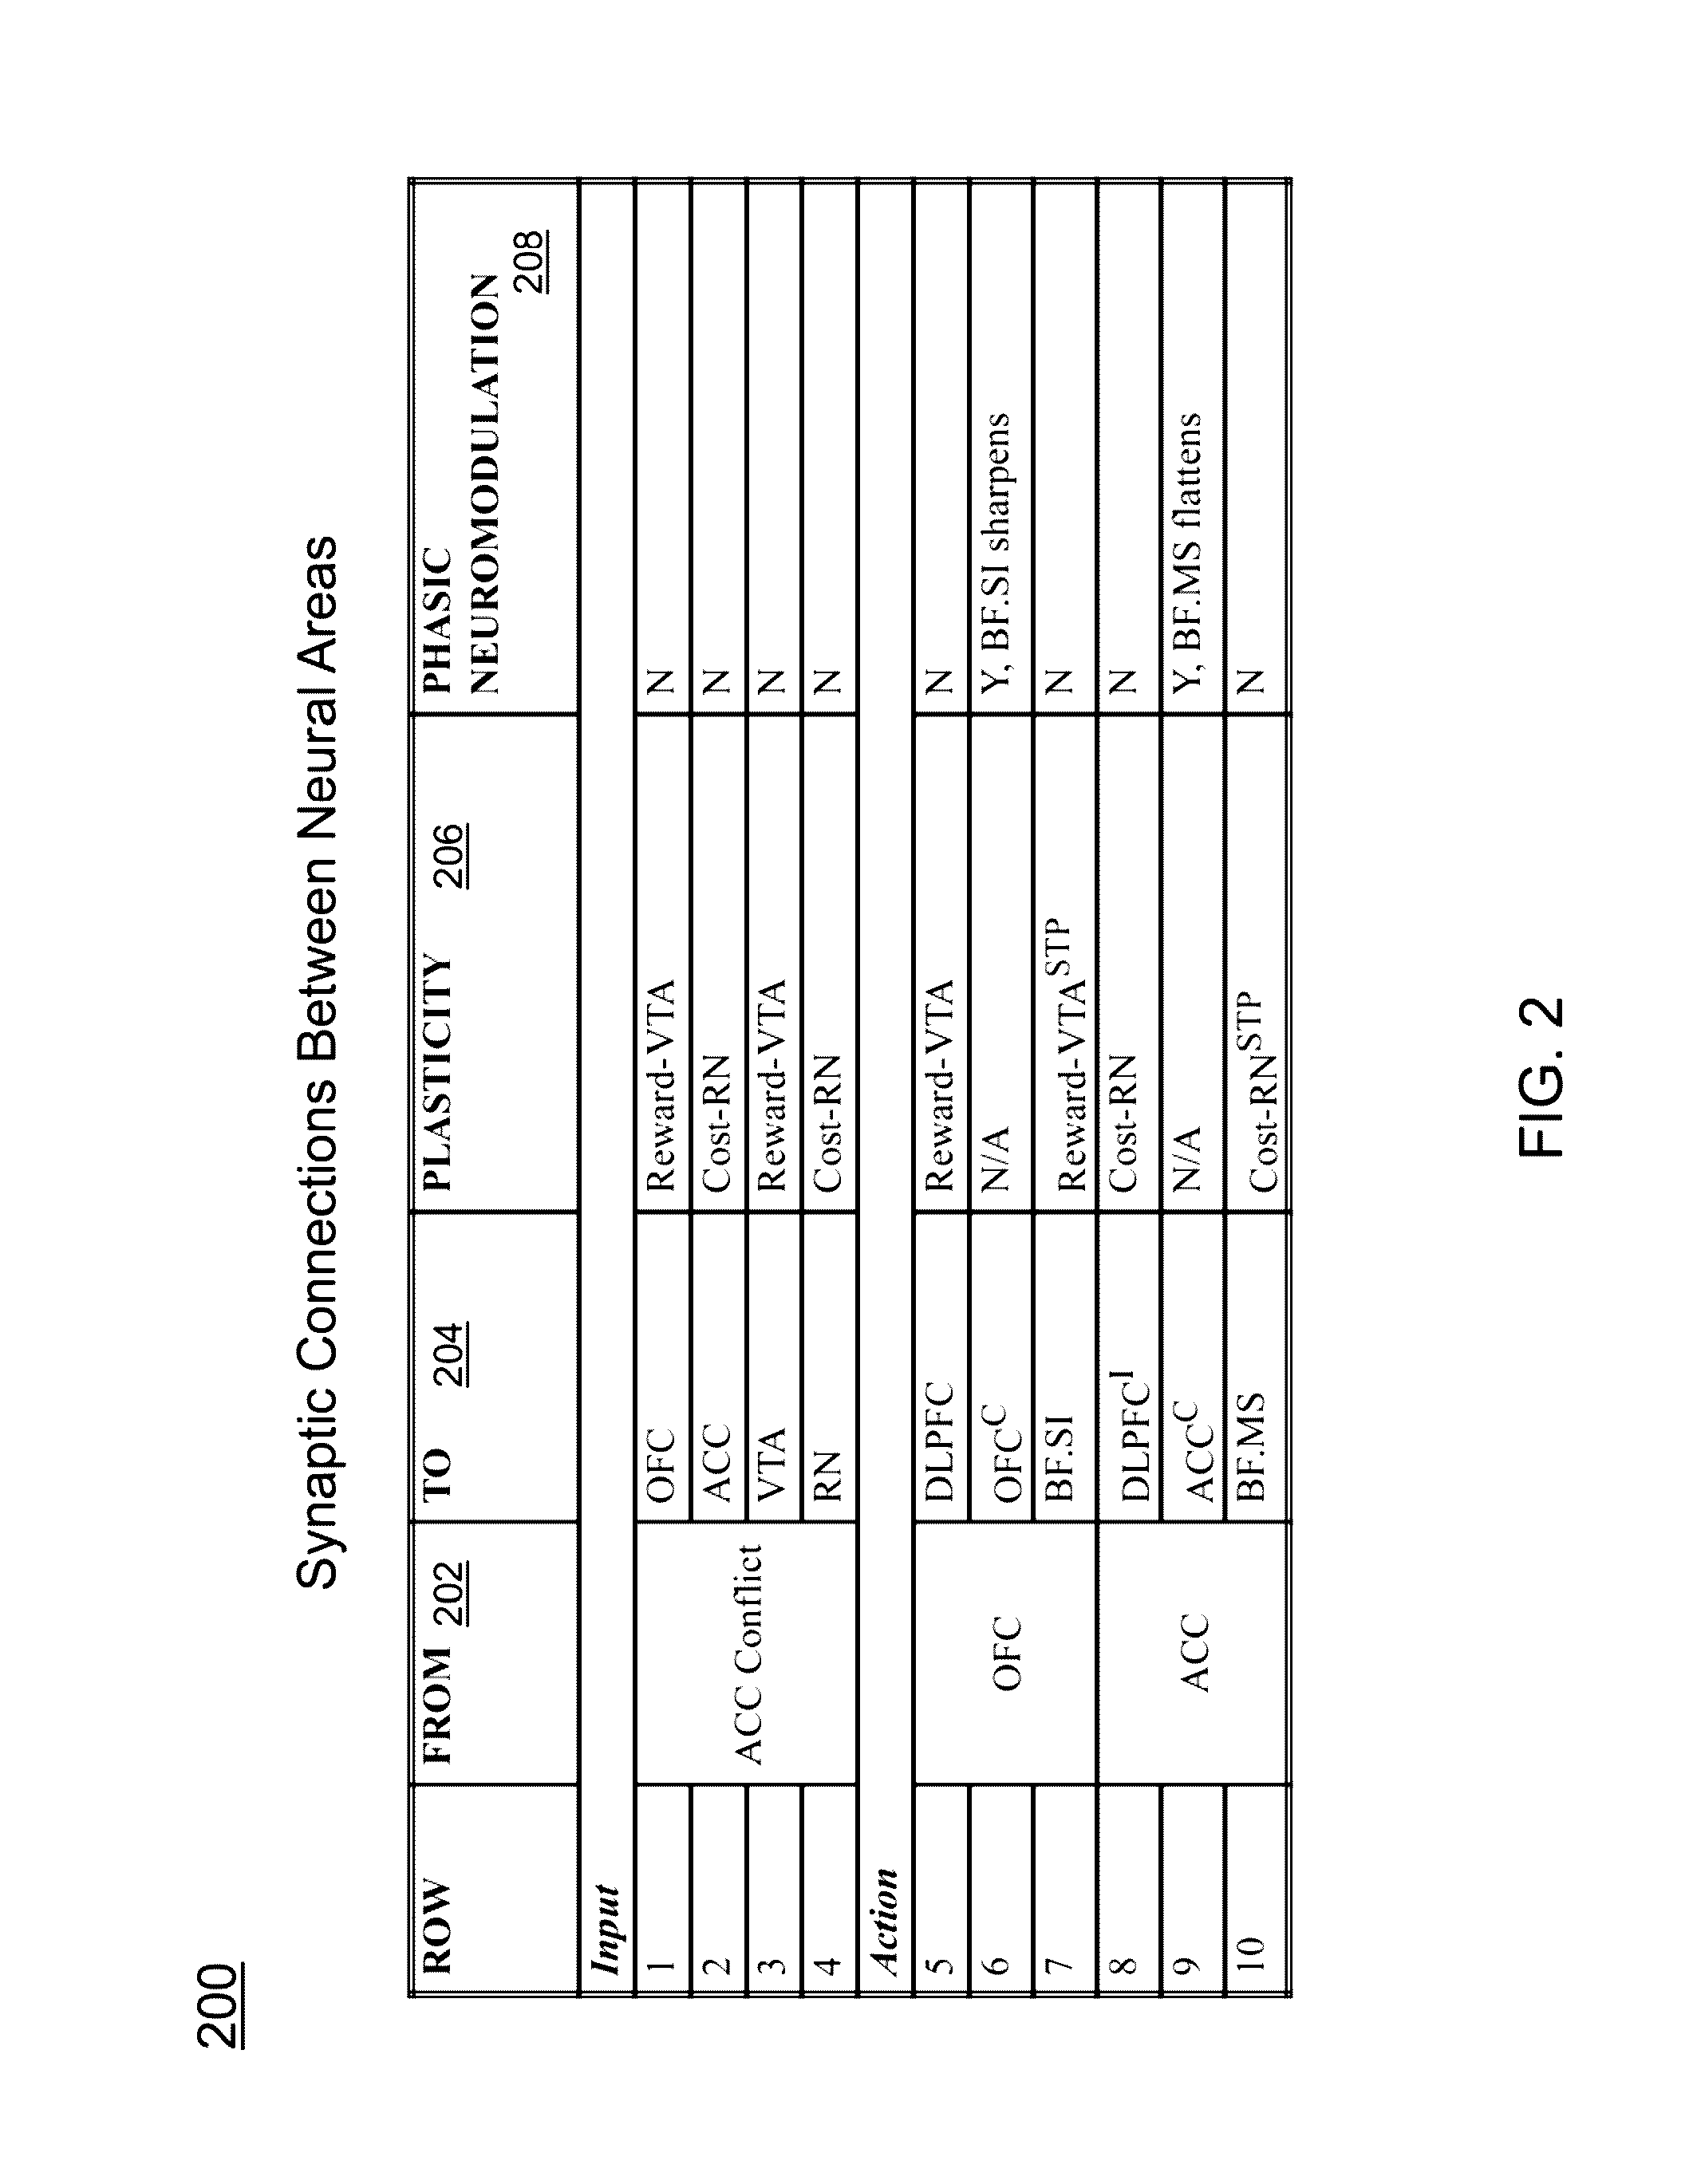 Method and apparatus for an action selection system based on a combination of neuromodulatory and prefrontal cortex area models